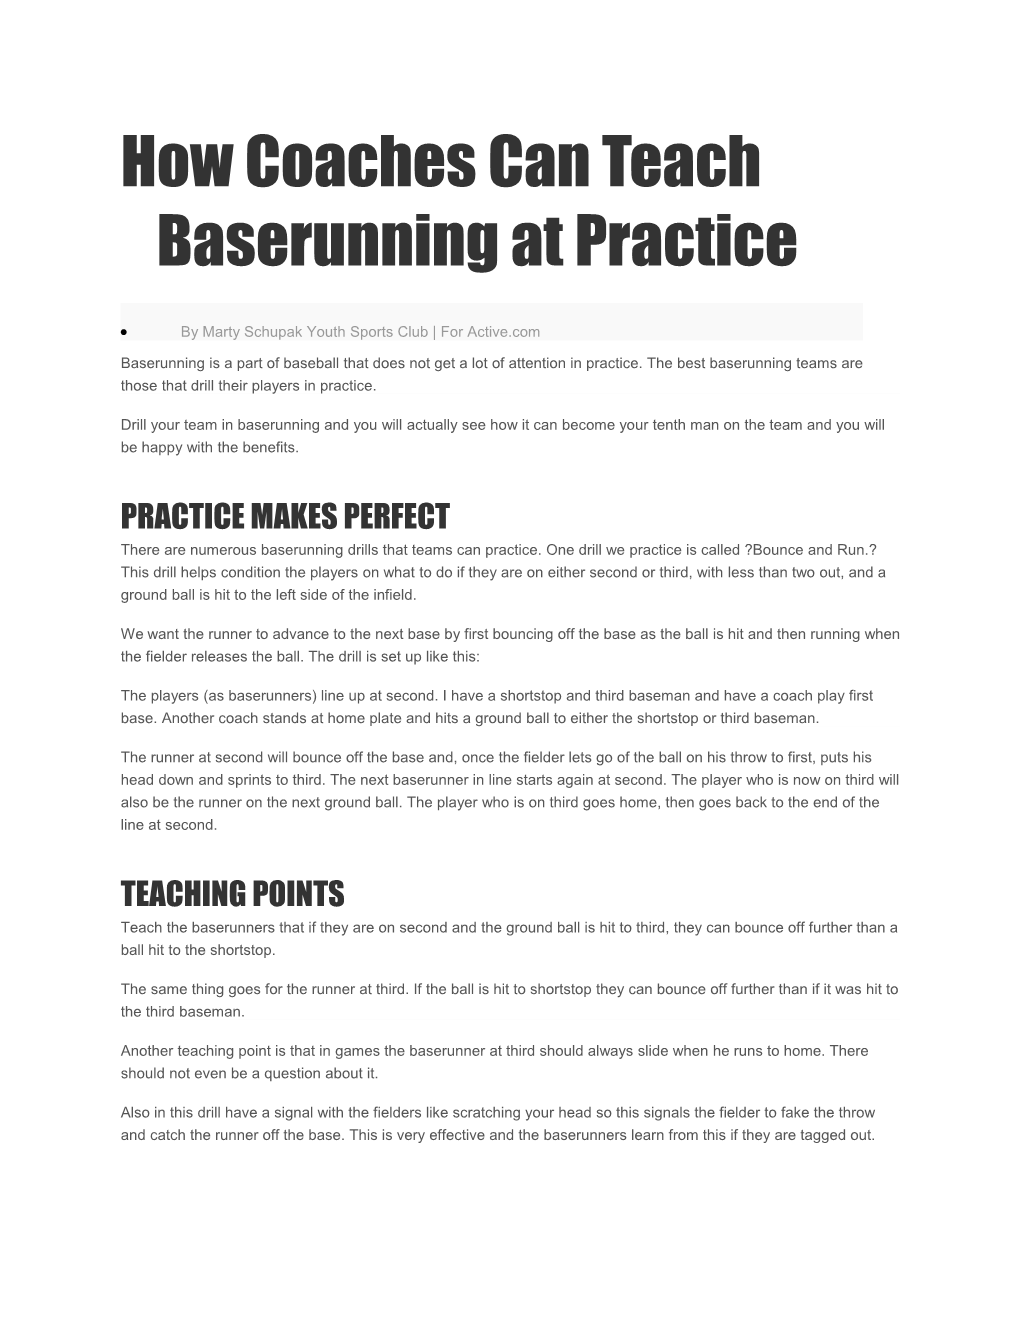 How Coaches Can Teach Baserunning at Practice